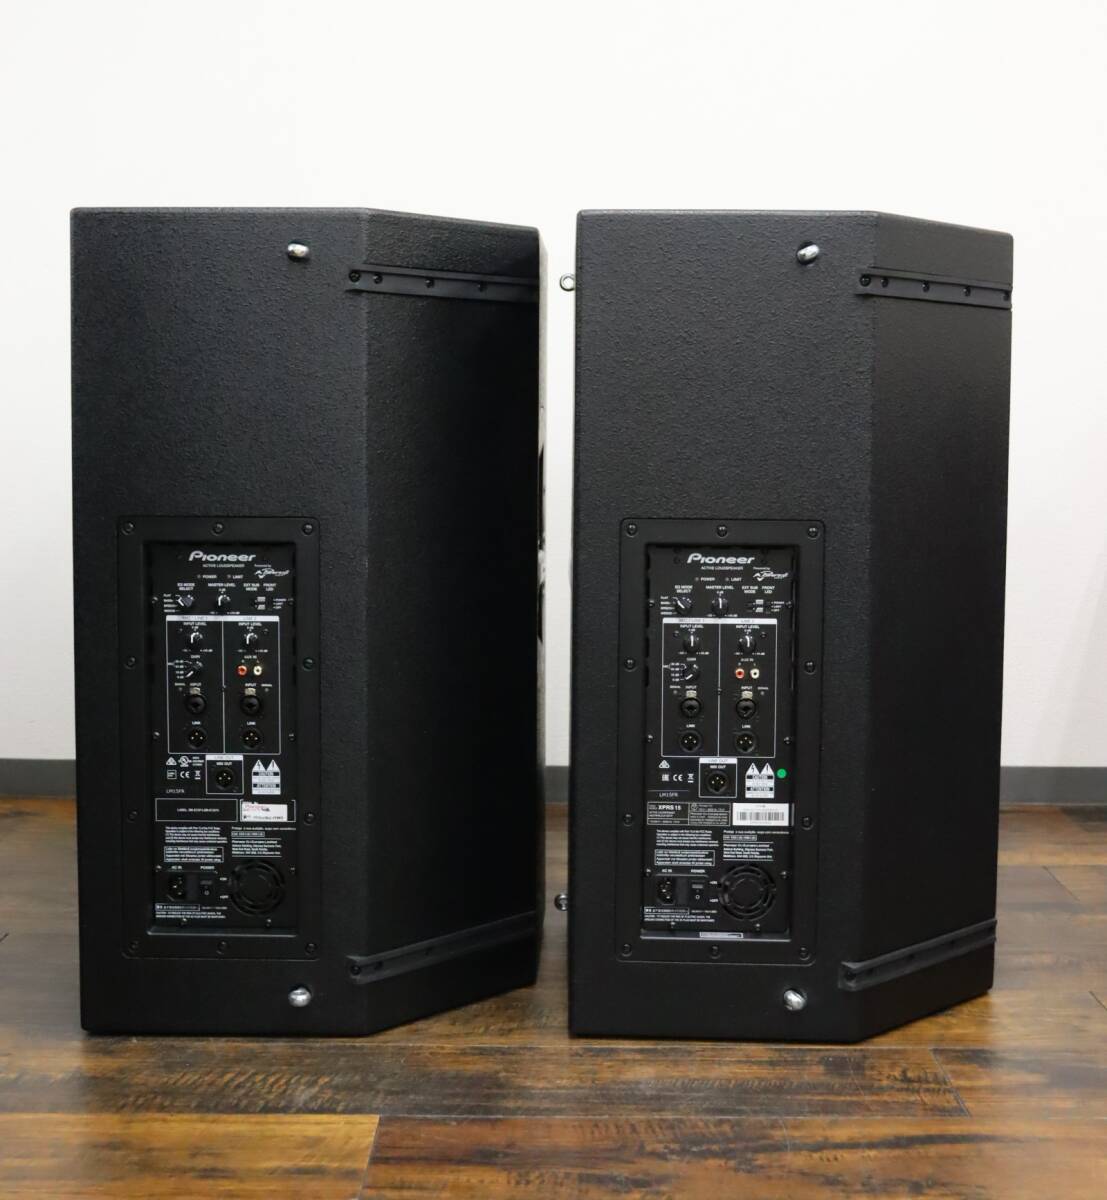  sound out OK Pioneer/ Pioneer speaker pair XPRS15 2 pcs /1 collection audio / recording sound equipment / machinery Pioneer DJ weight approximately 28kg J1342+